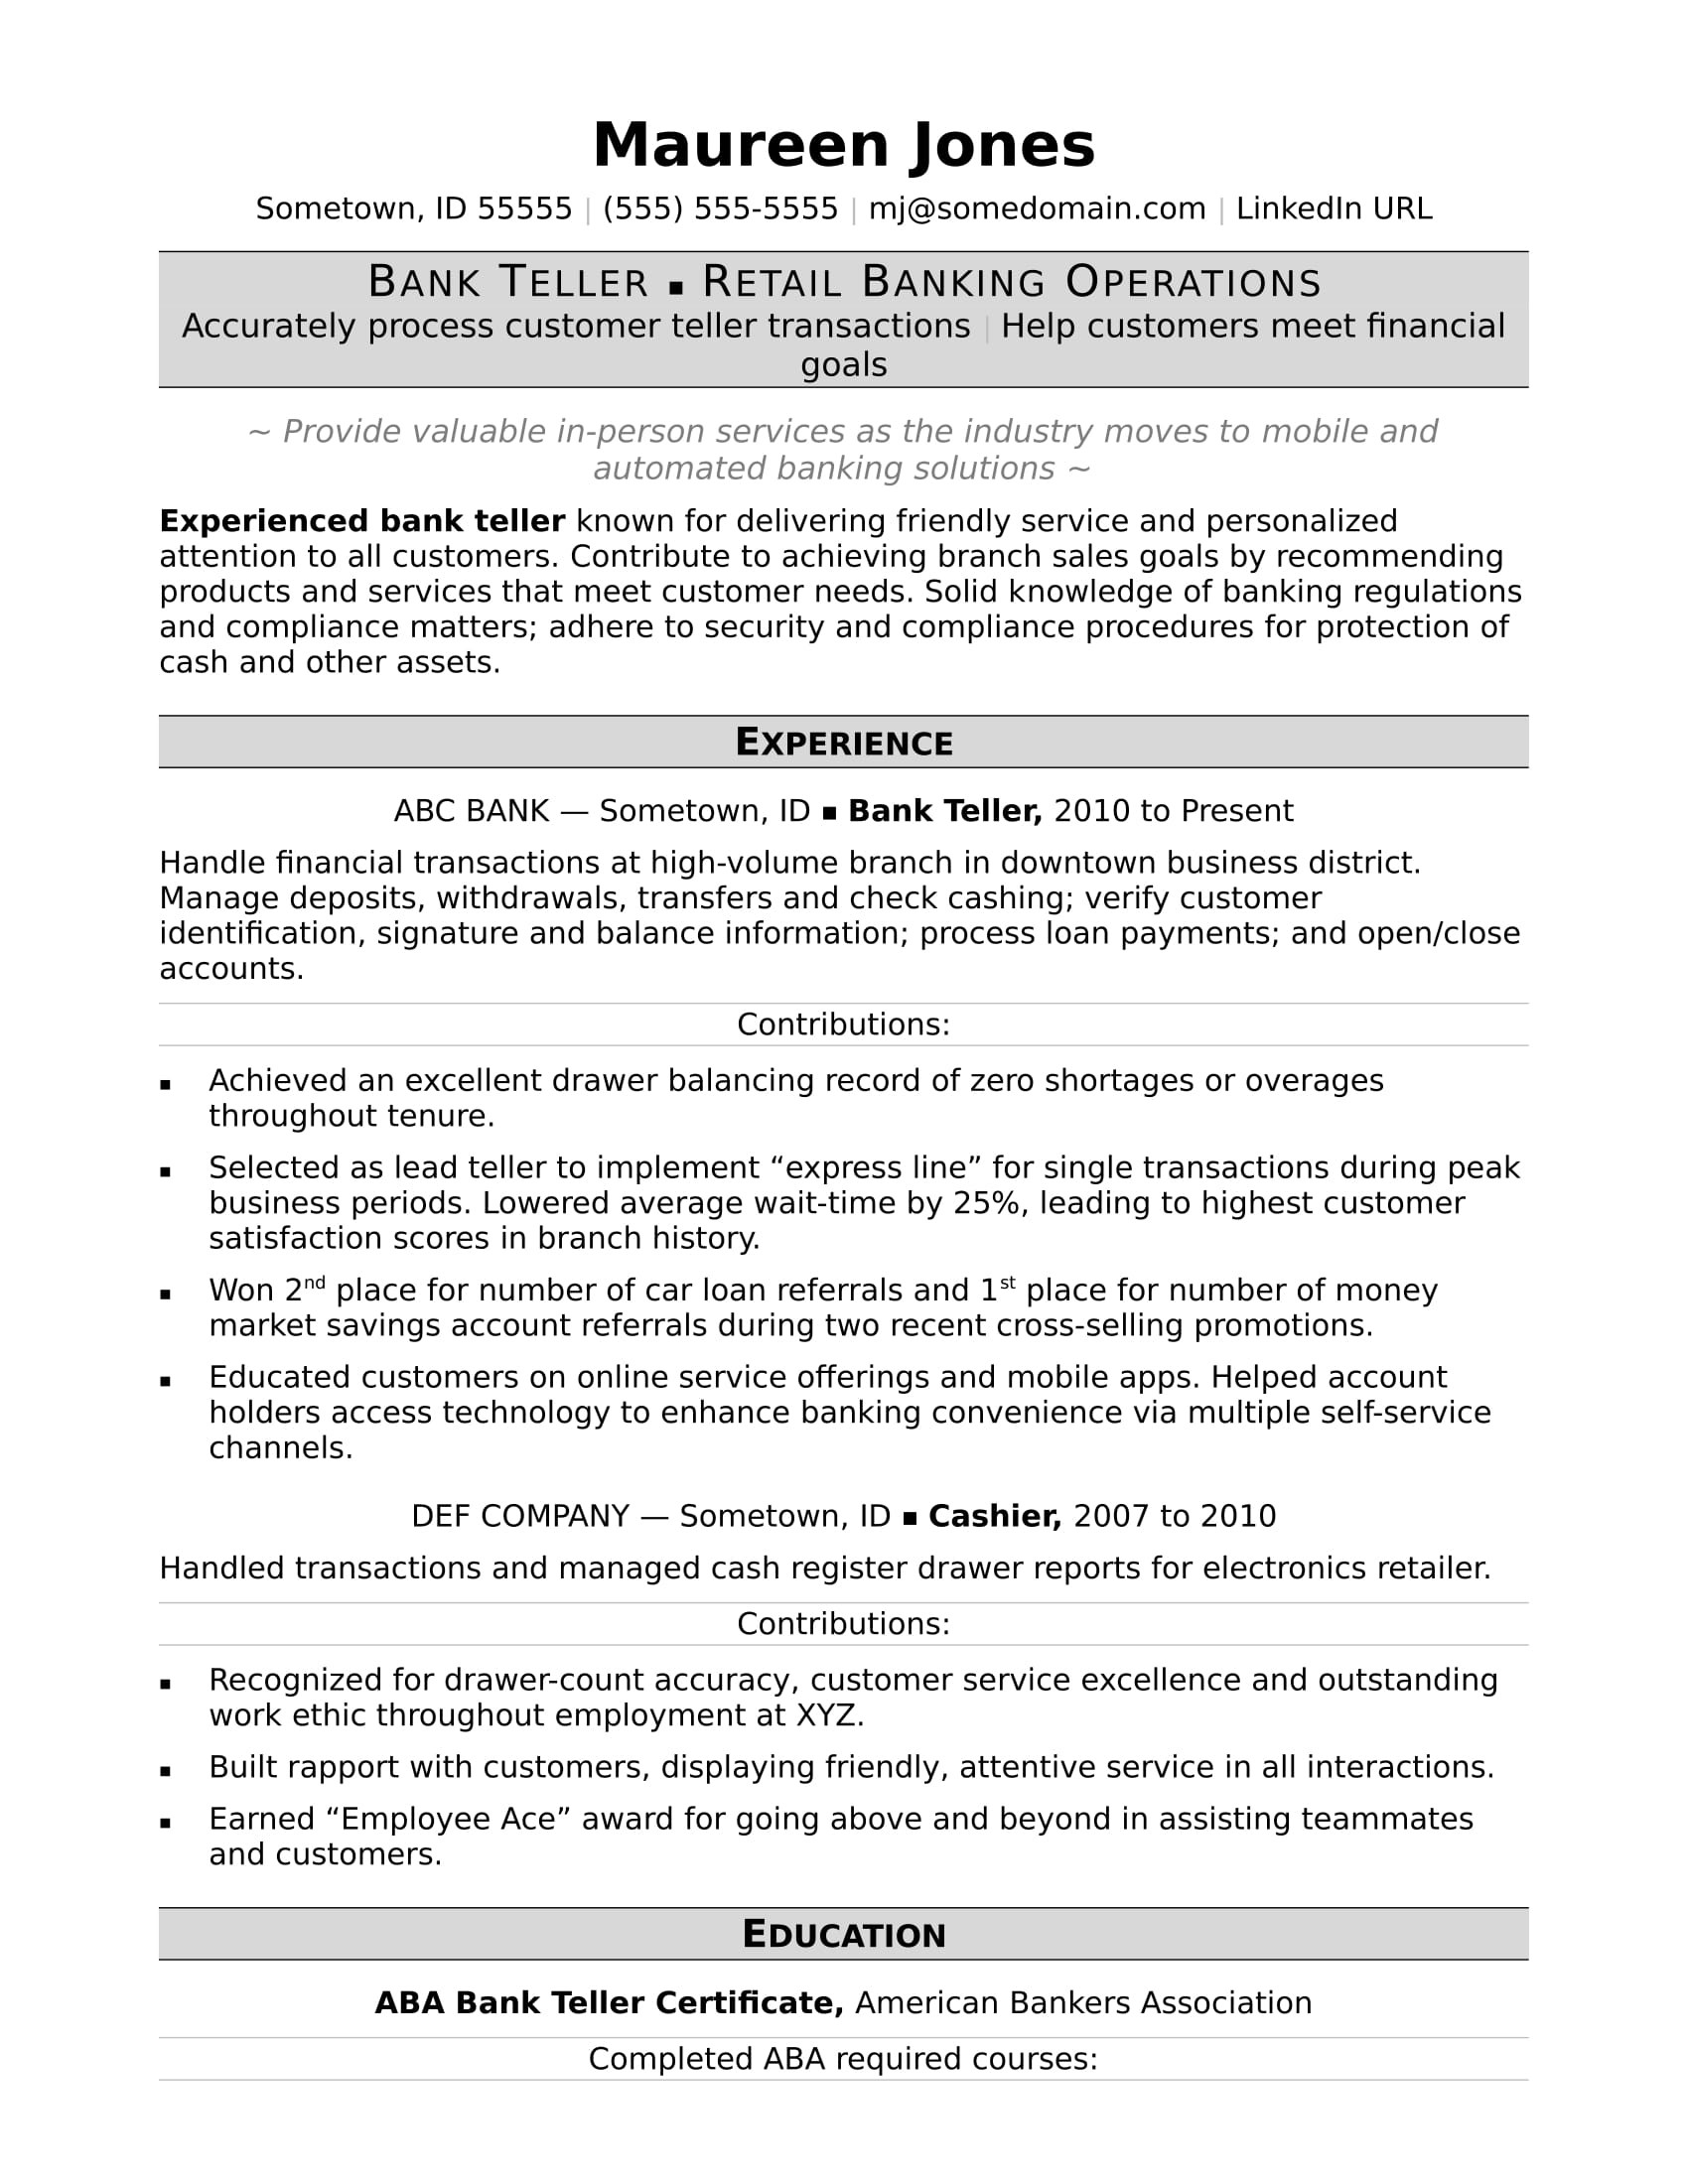 Sample Resume for Bank Po Jobs with No Experience Bank Teller Resume Monster.com